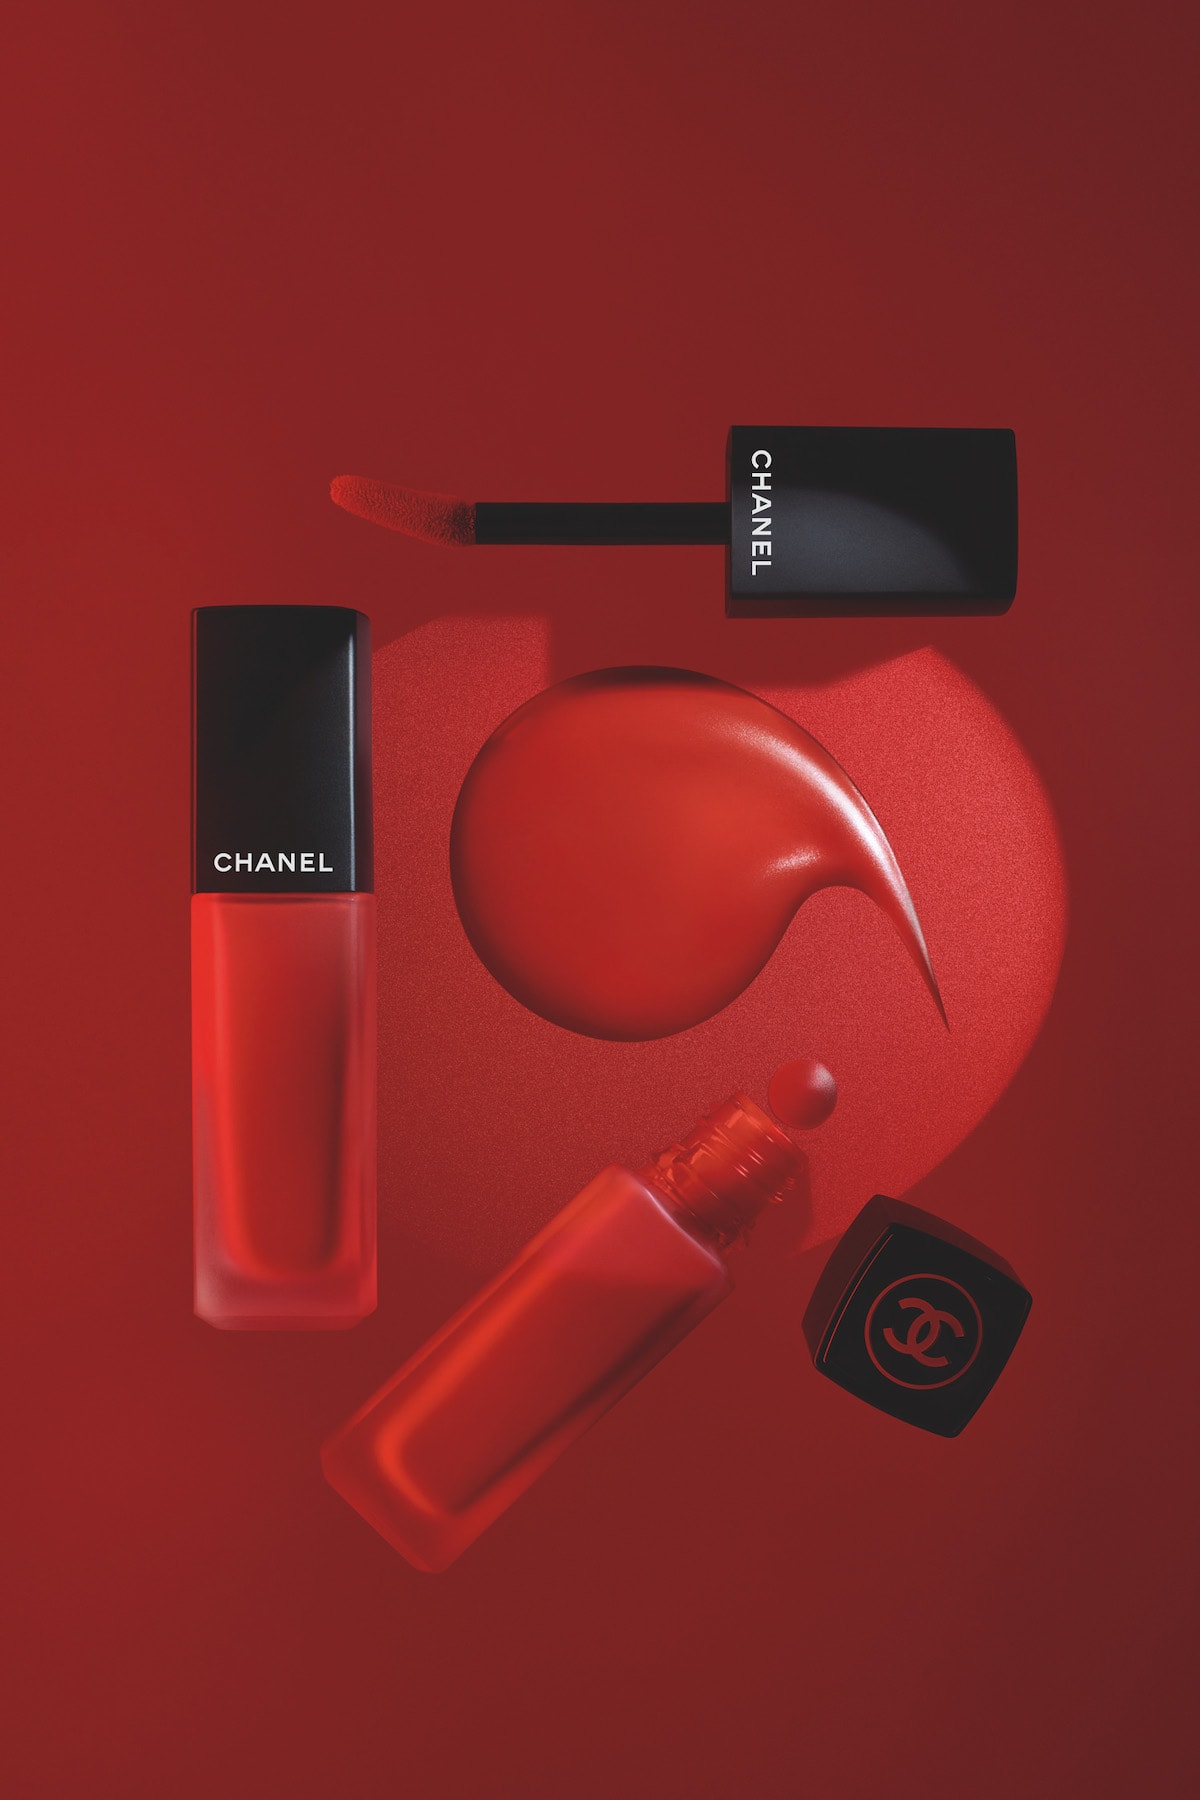 Chanel Rouge Allure Ink Fusion Liquid Lipstick Collection Makeup Beauty Product Release Glam 